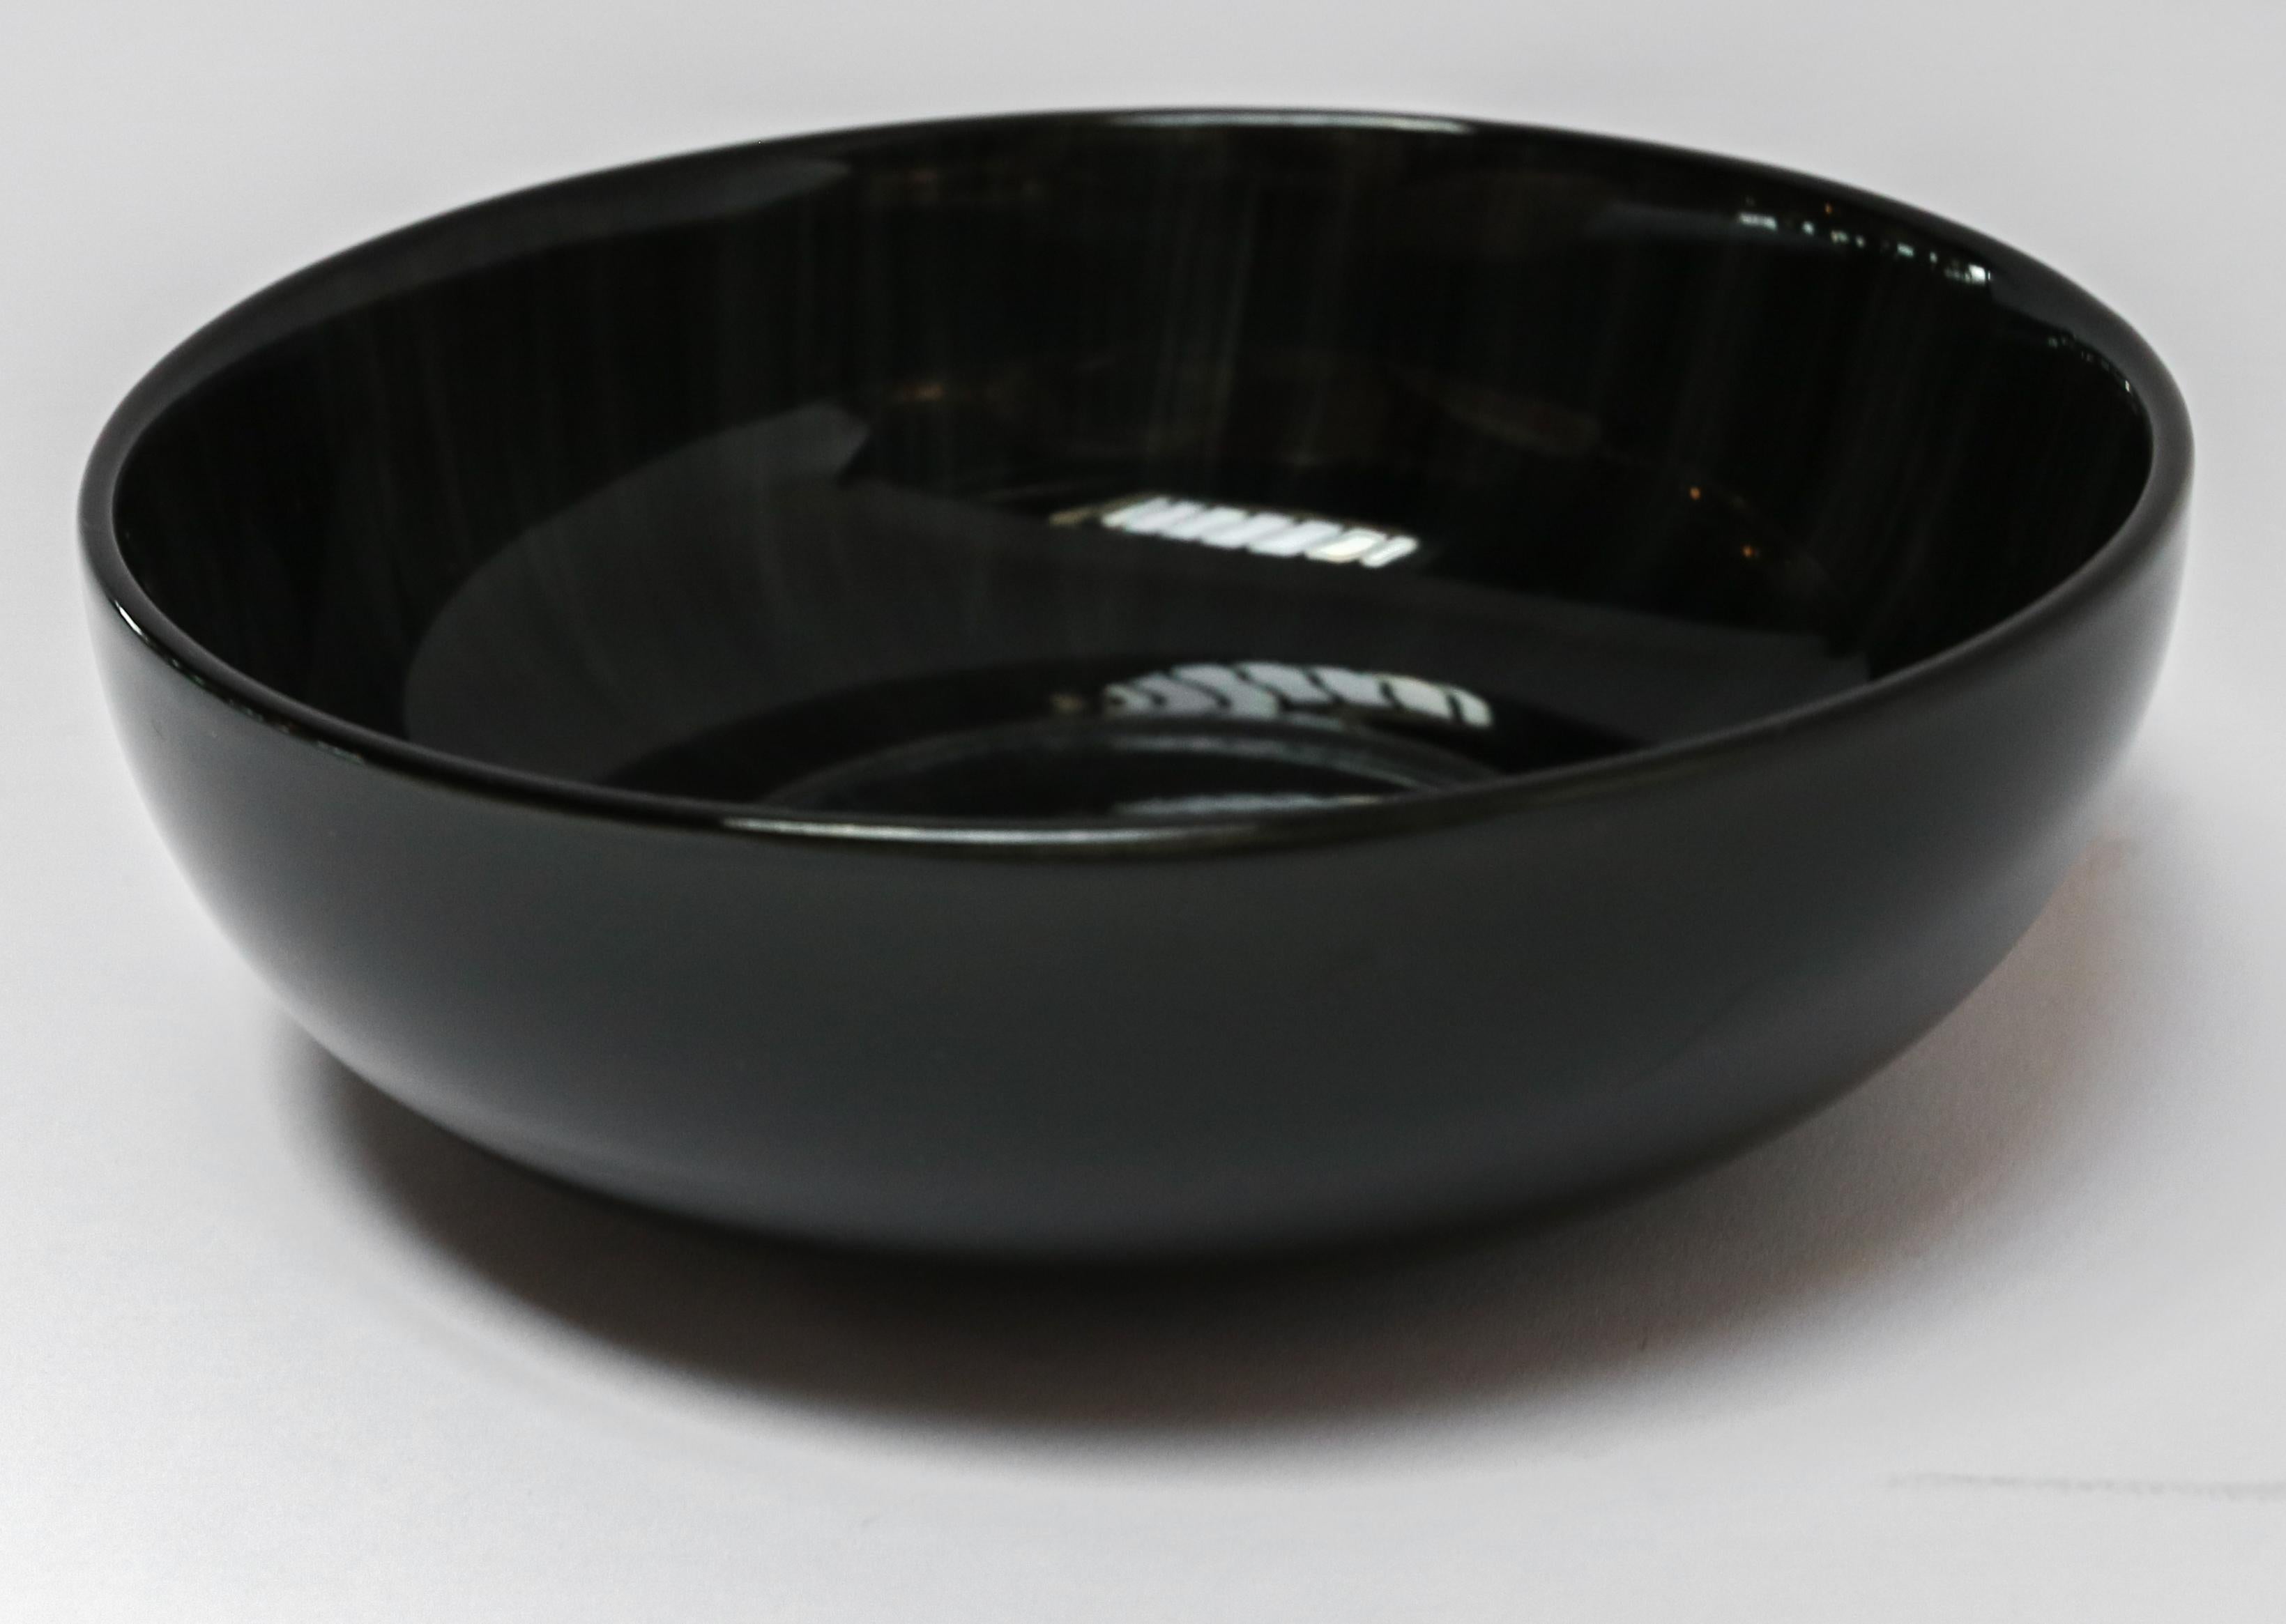 Ann Demeulemeester for Serax Dé x-small high plate / bowl in black / off white. Hand painted with a starburst pattern. Measures: 12.9cm diameter x 4.2 cm high. Must be purchased in quantities of two.